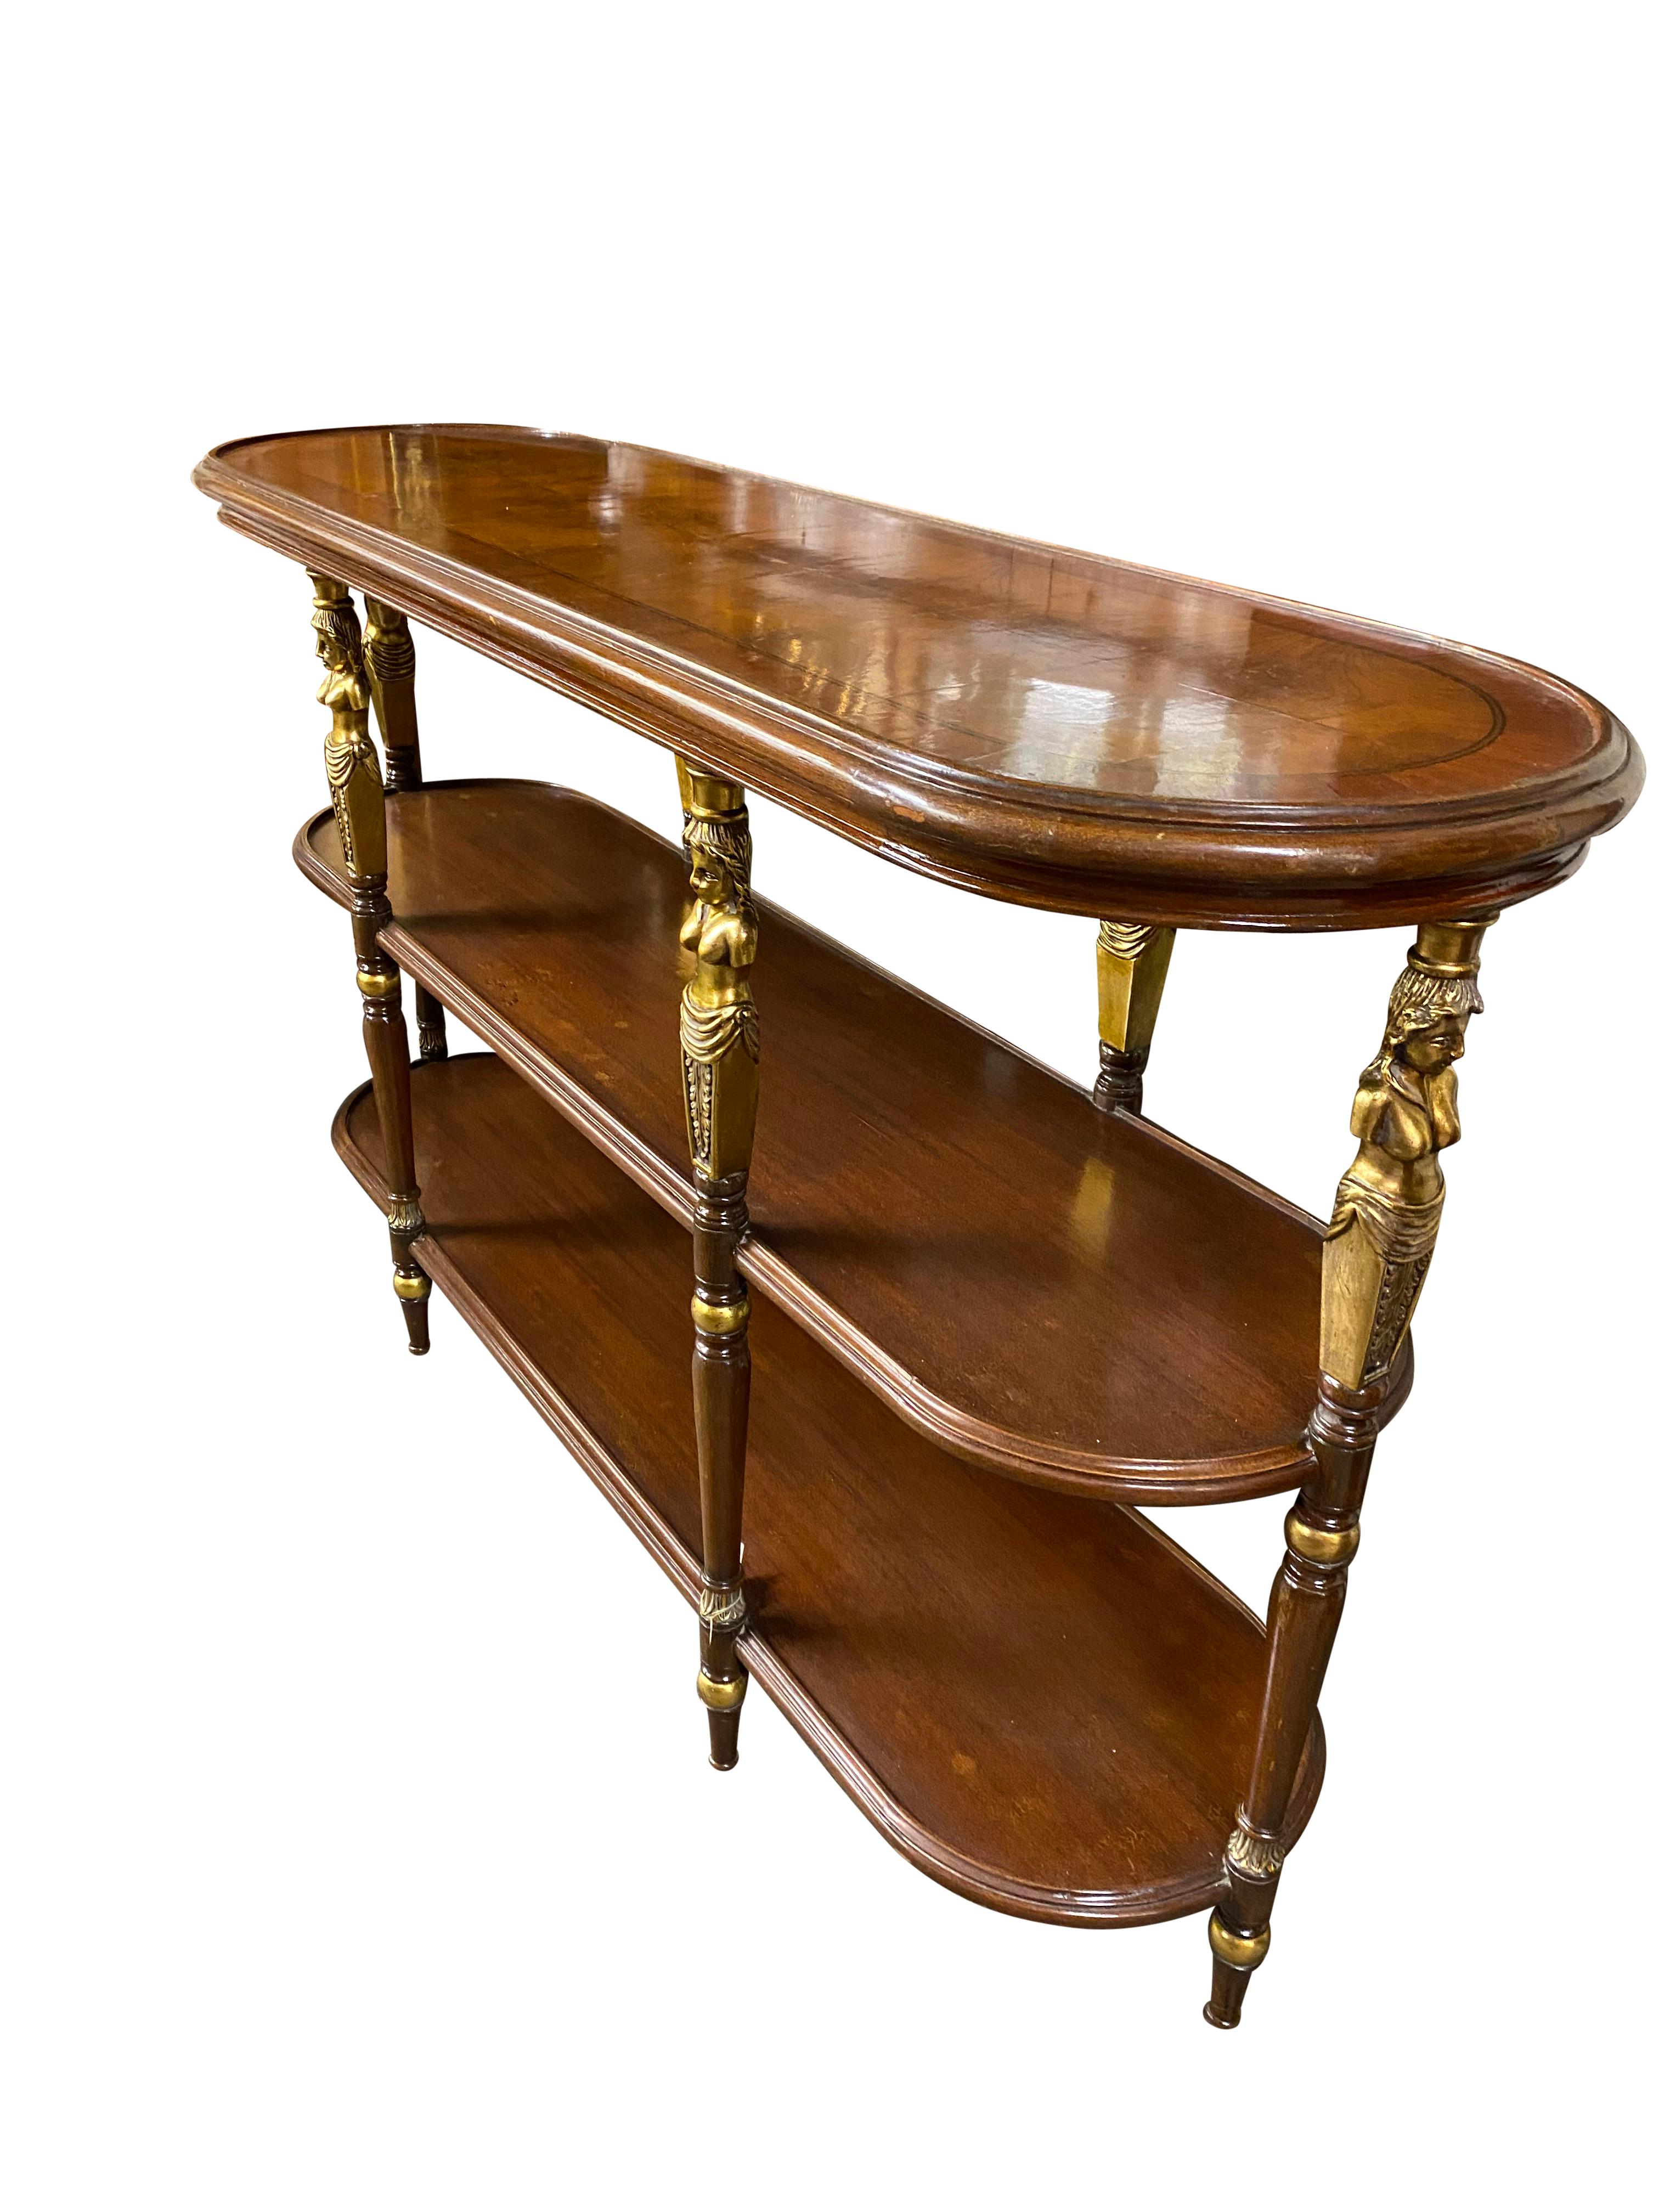 20th Century French Empire Style Open Bookcase/Etagere Tiered Table For Sale 9